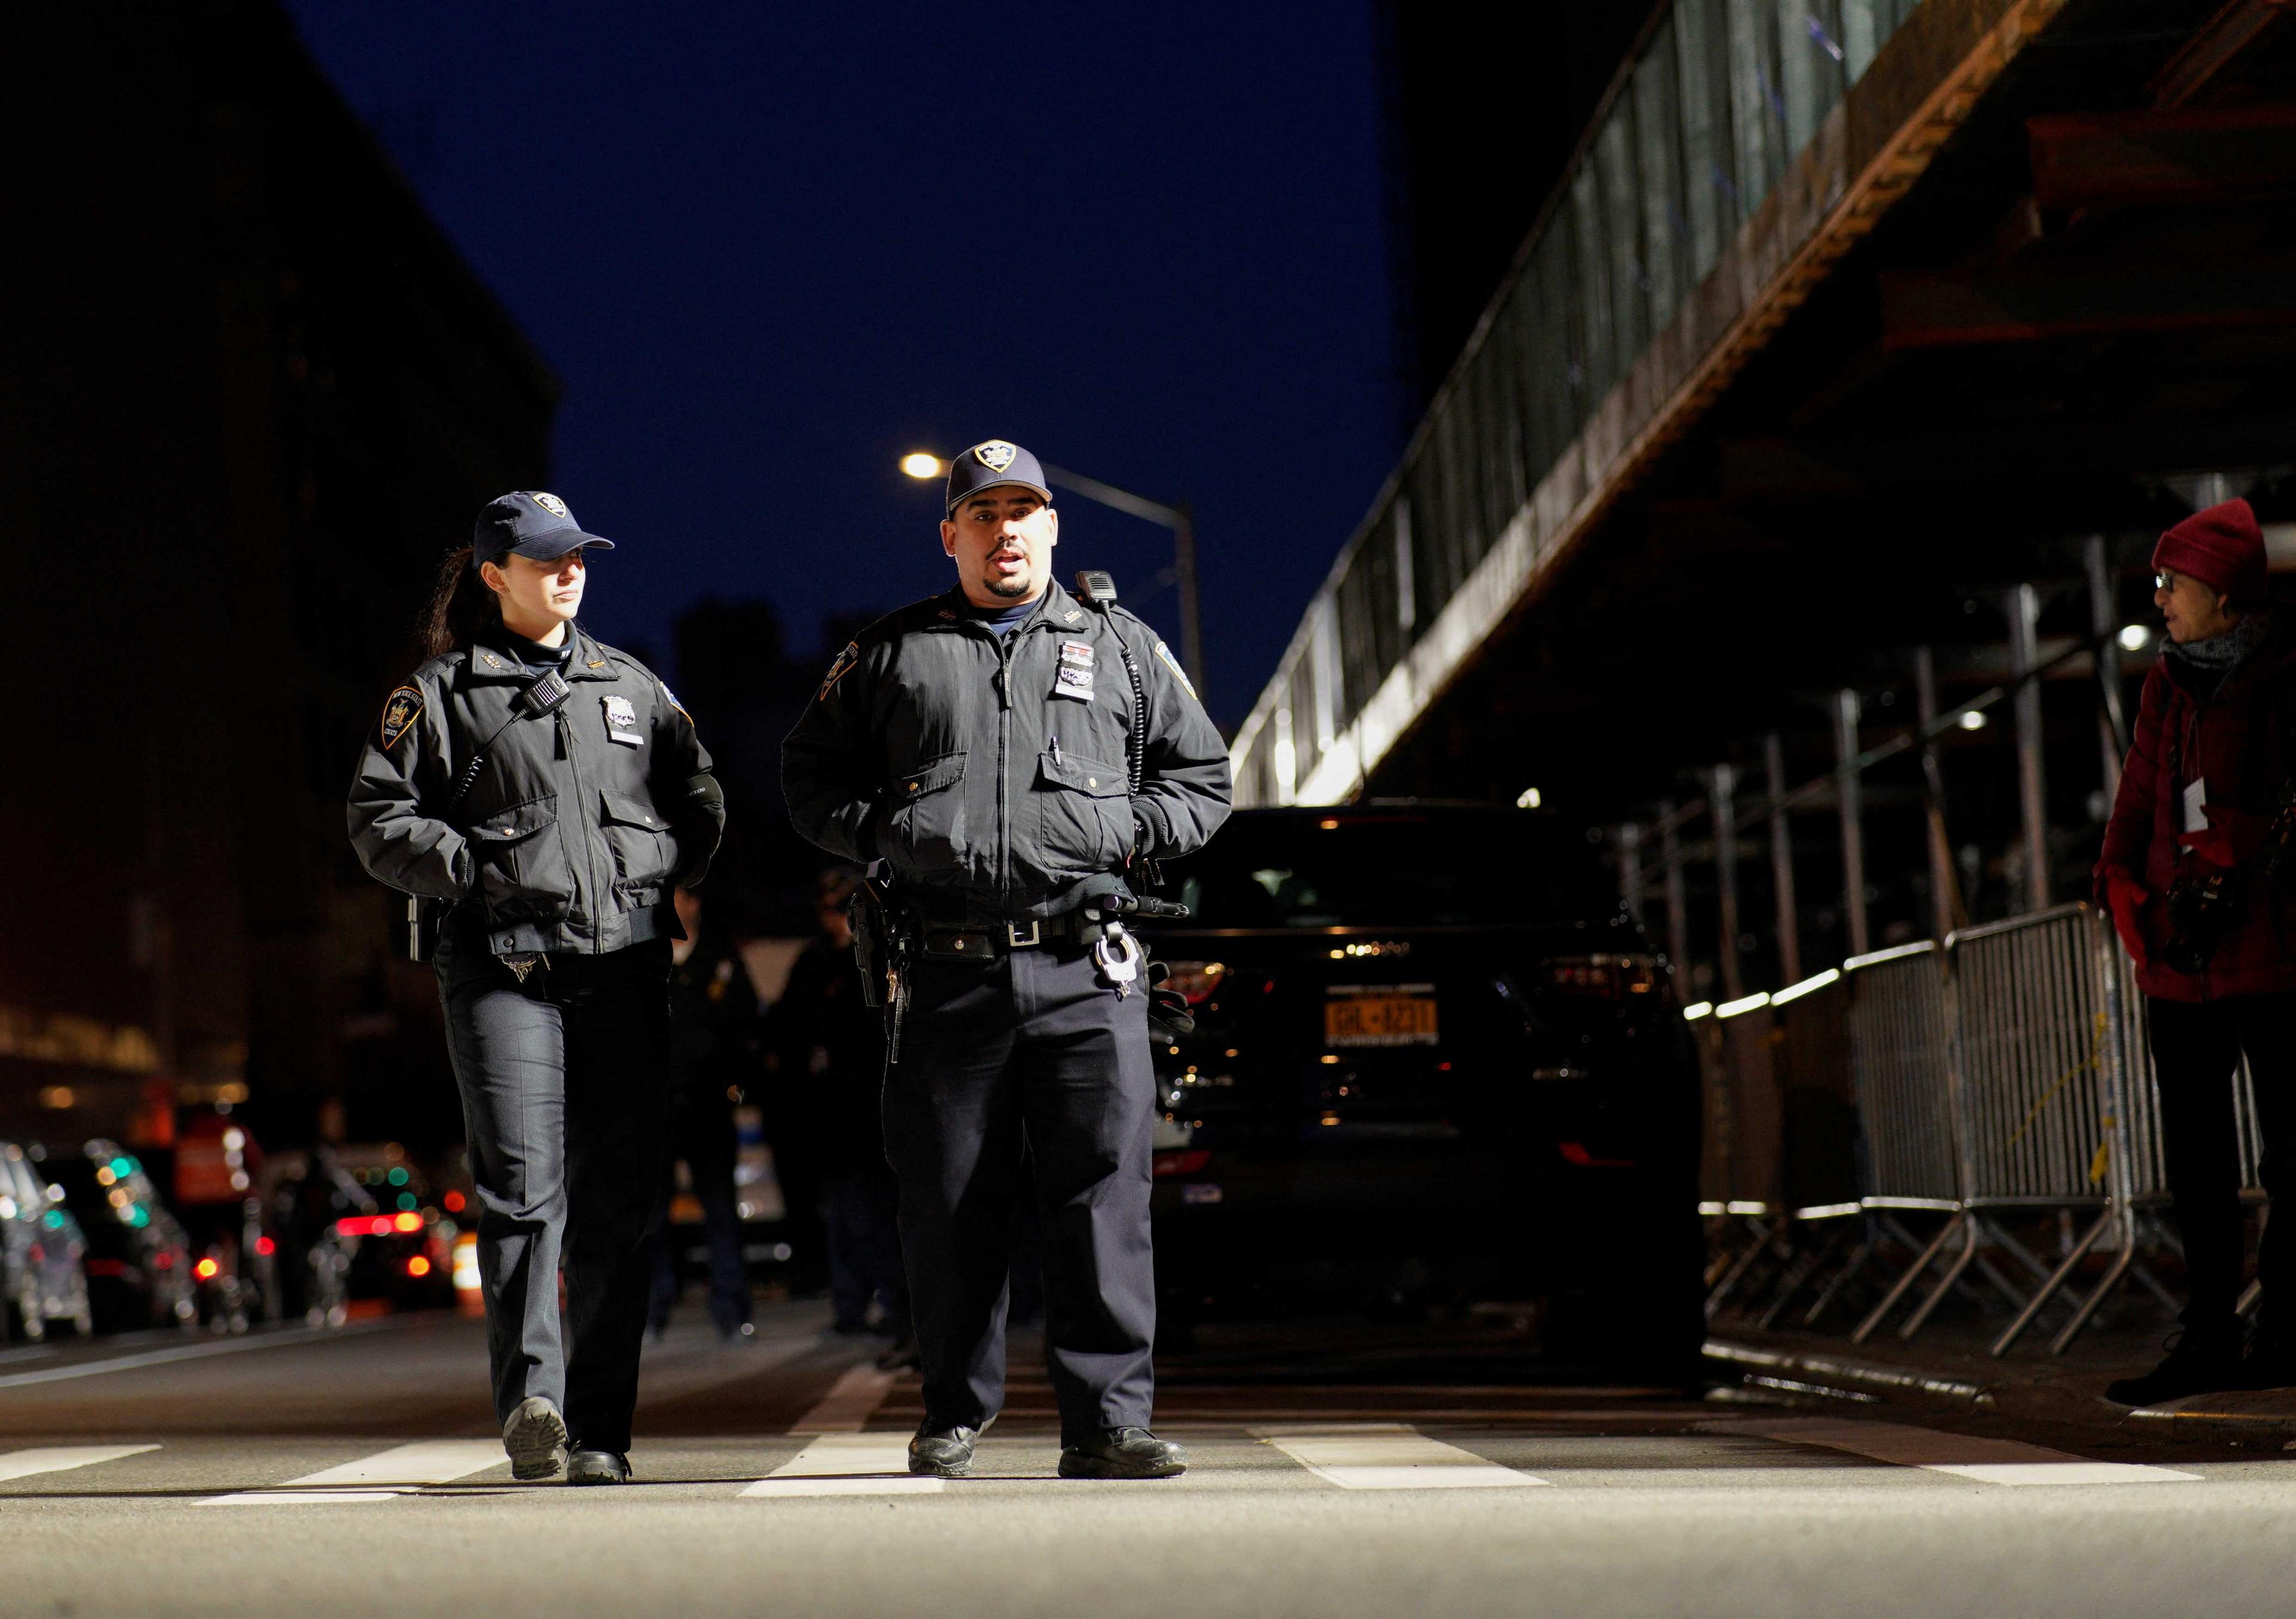 Police officers walk in New York City, US, March 30. Photo: Reuters